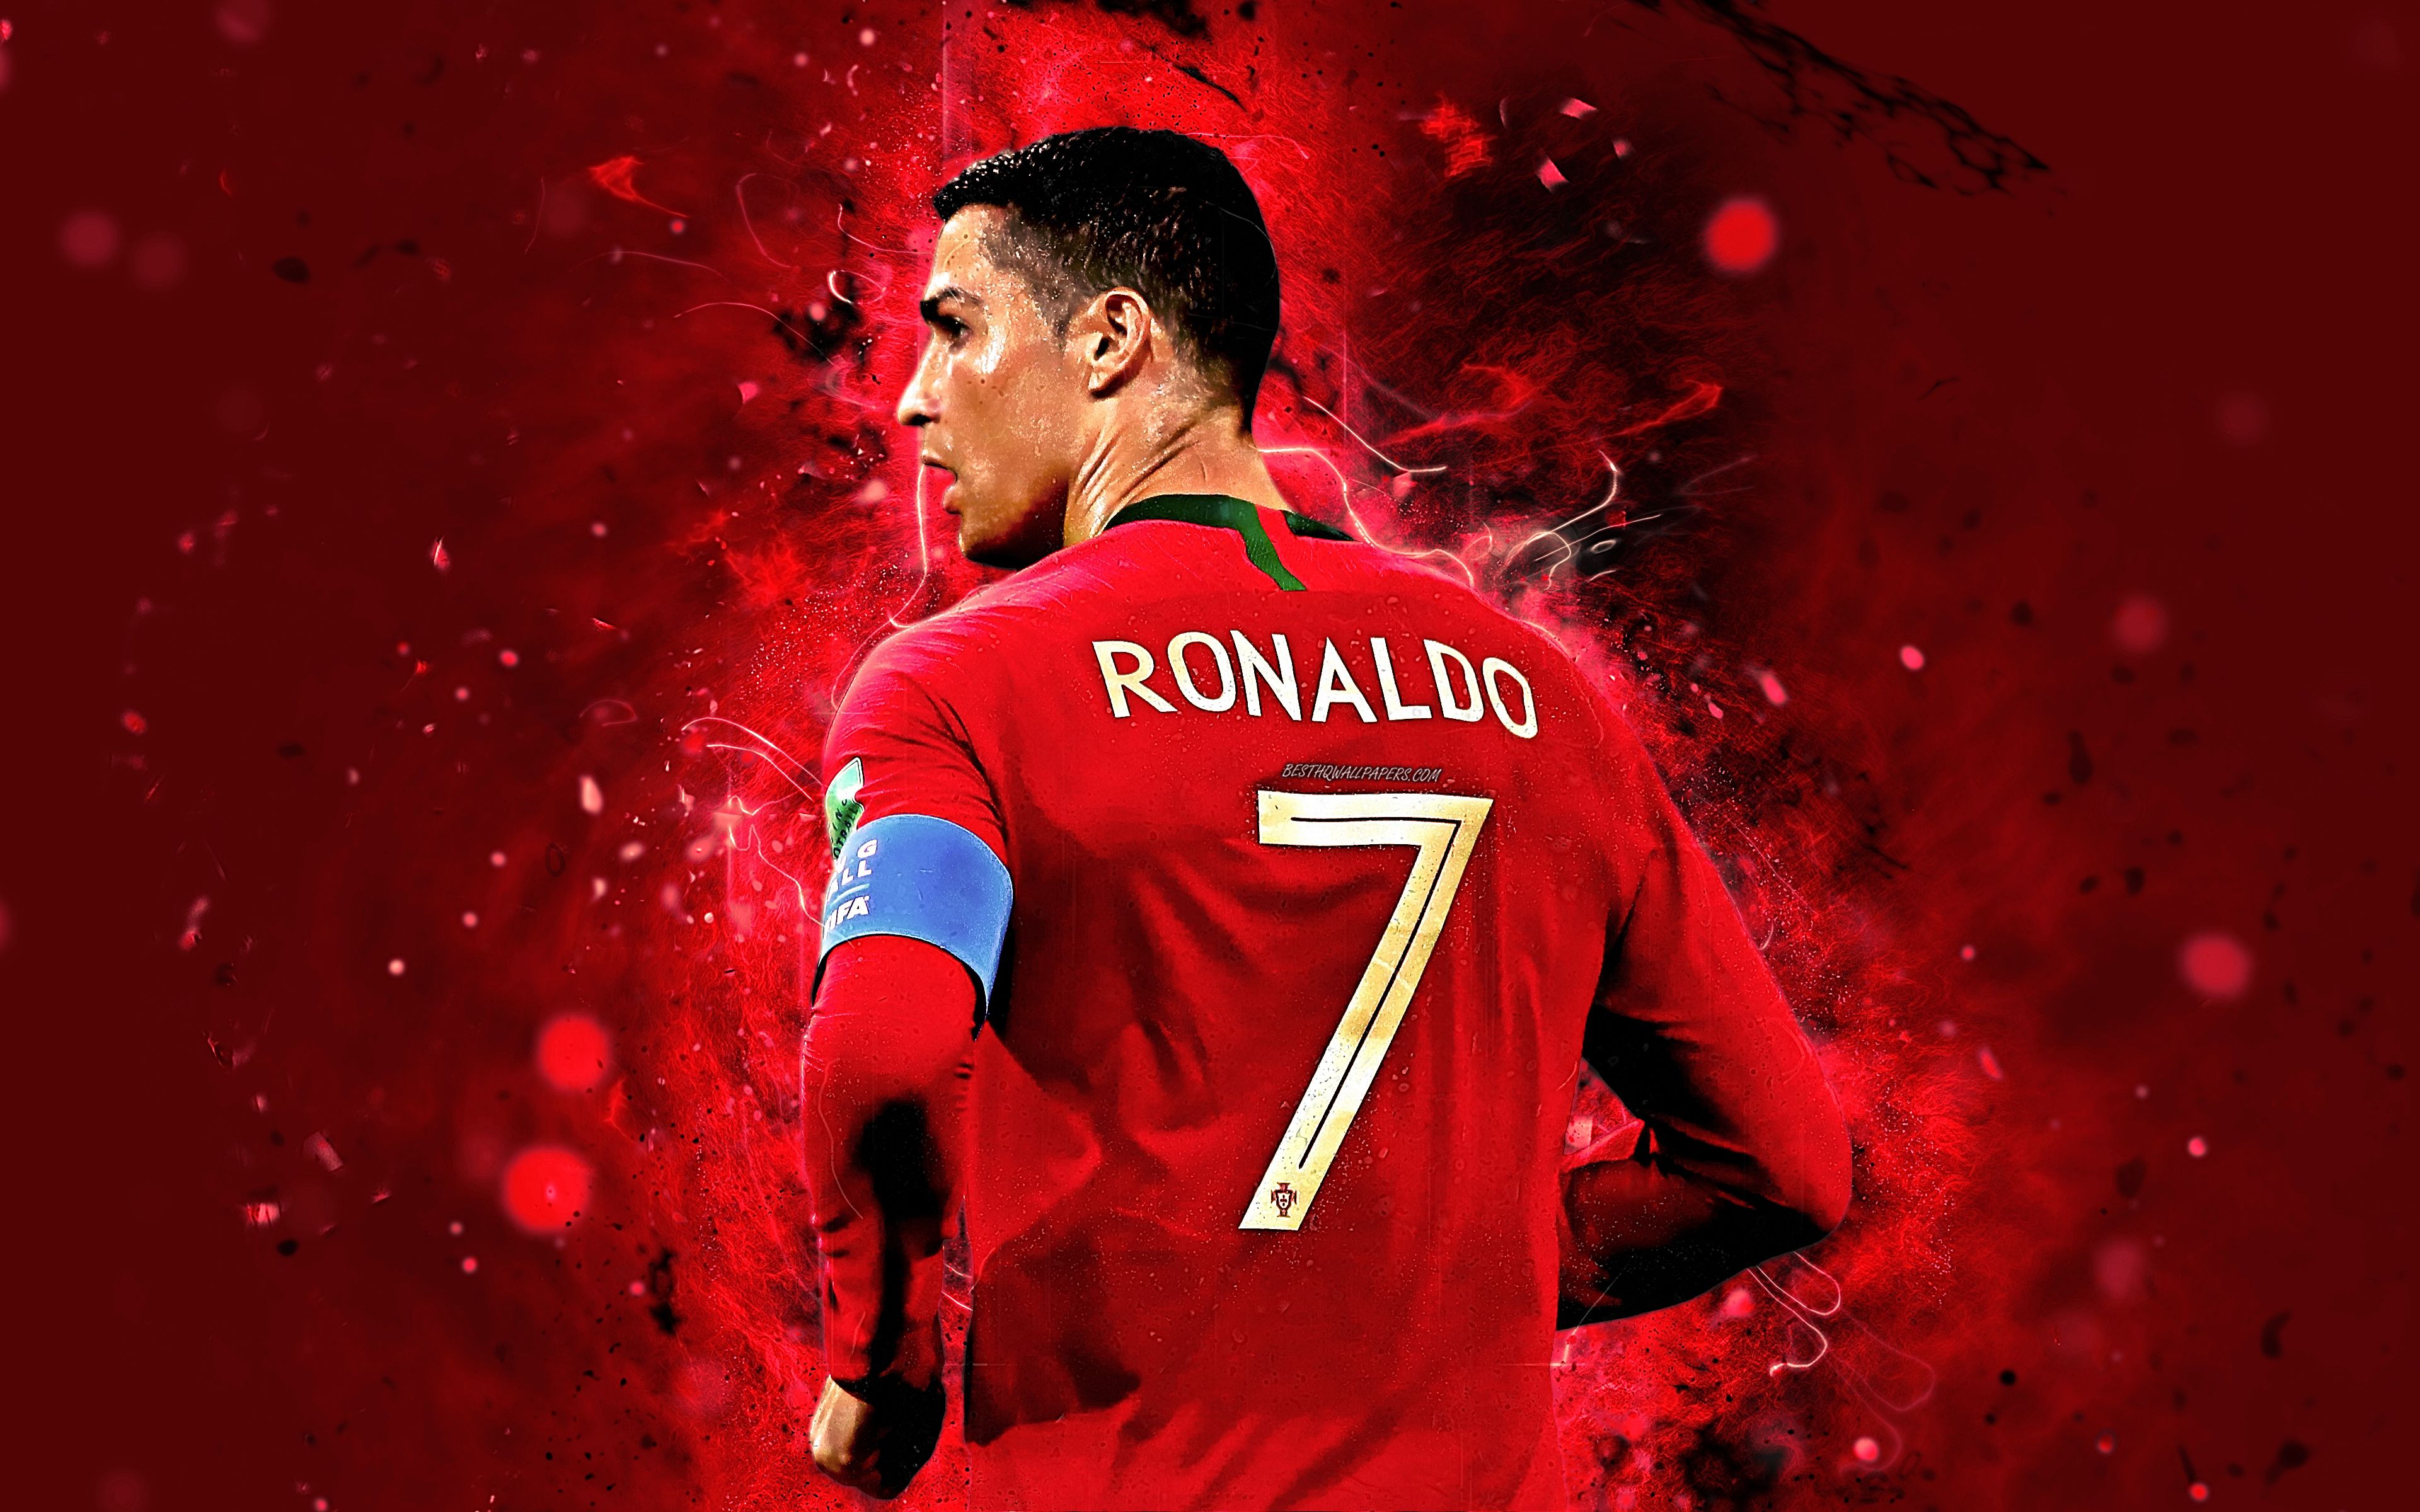 Download wallpaper Cristiano Ronaldo, 4k, back view, CR abstract art, Portugal National Team, fan art, Ronaldo, soccer, footballers, red uniform, Portuguese football team for desktop with resolution 3840x2400. High Quality HD picture